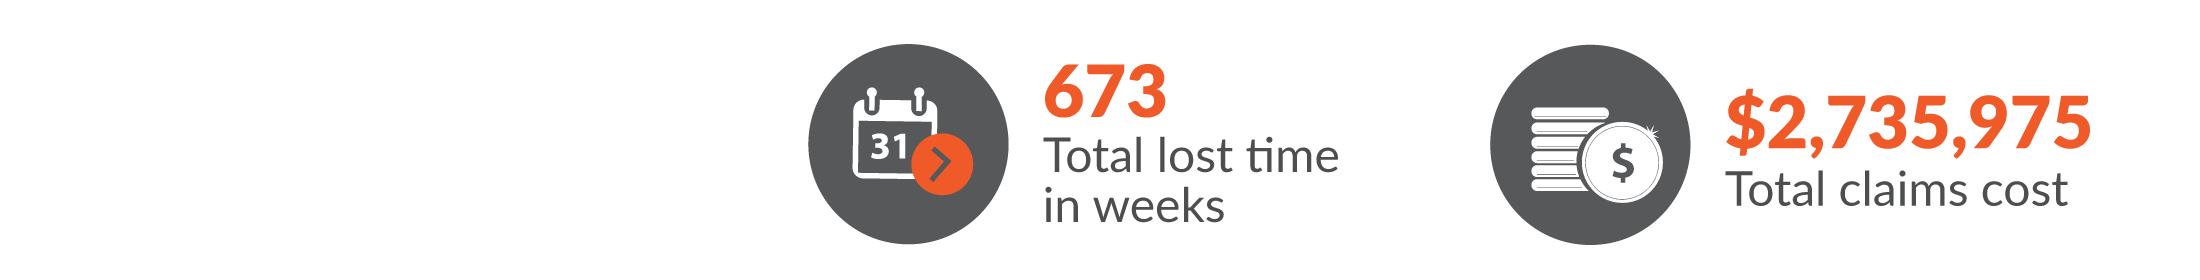 This infographic shows total workers compensation claims for Retail trade resulted in 673 total lost time in weeks and $2,735,975 was paid in benefits.